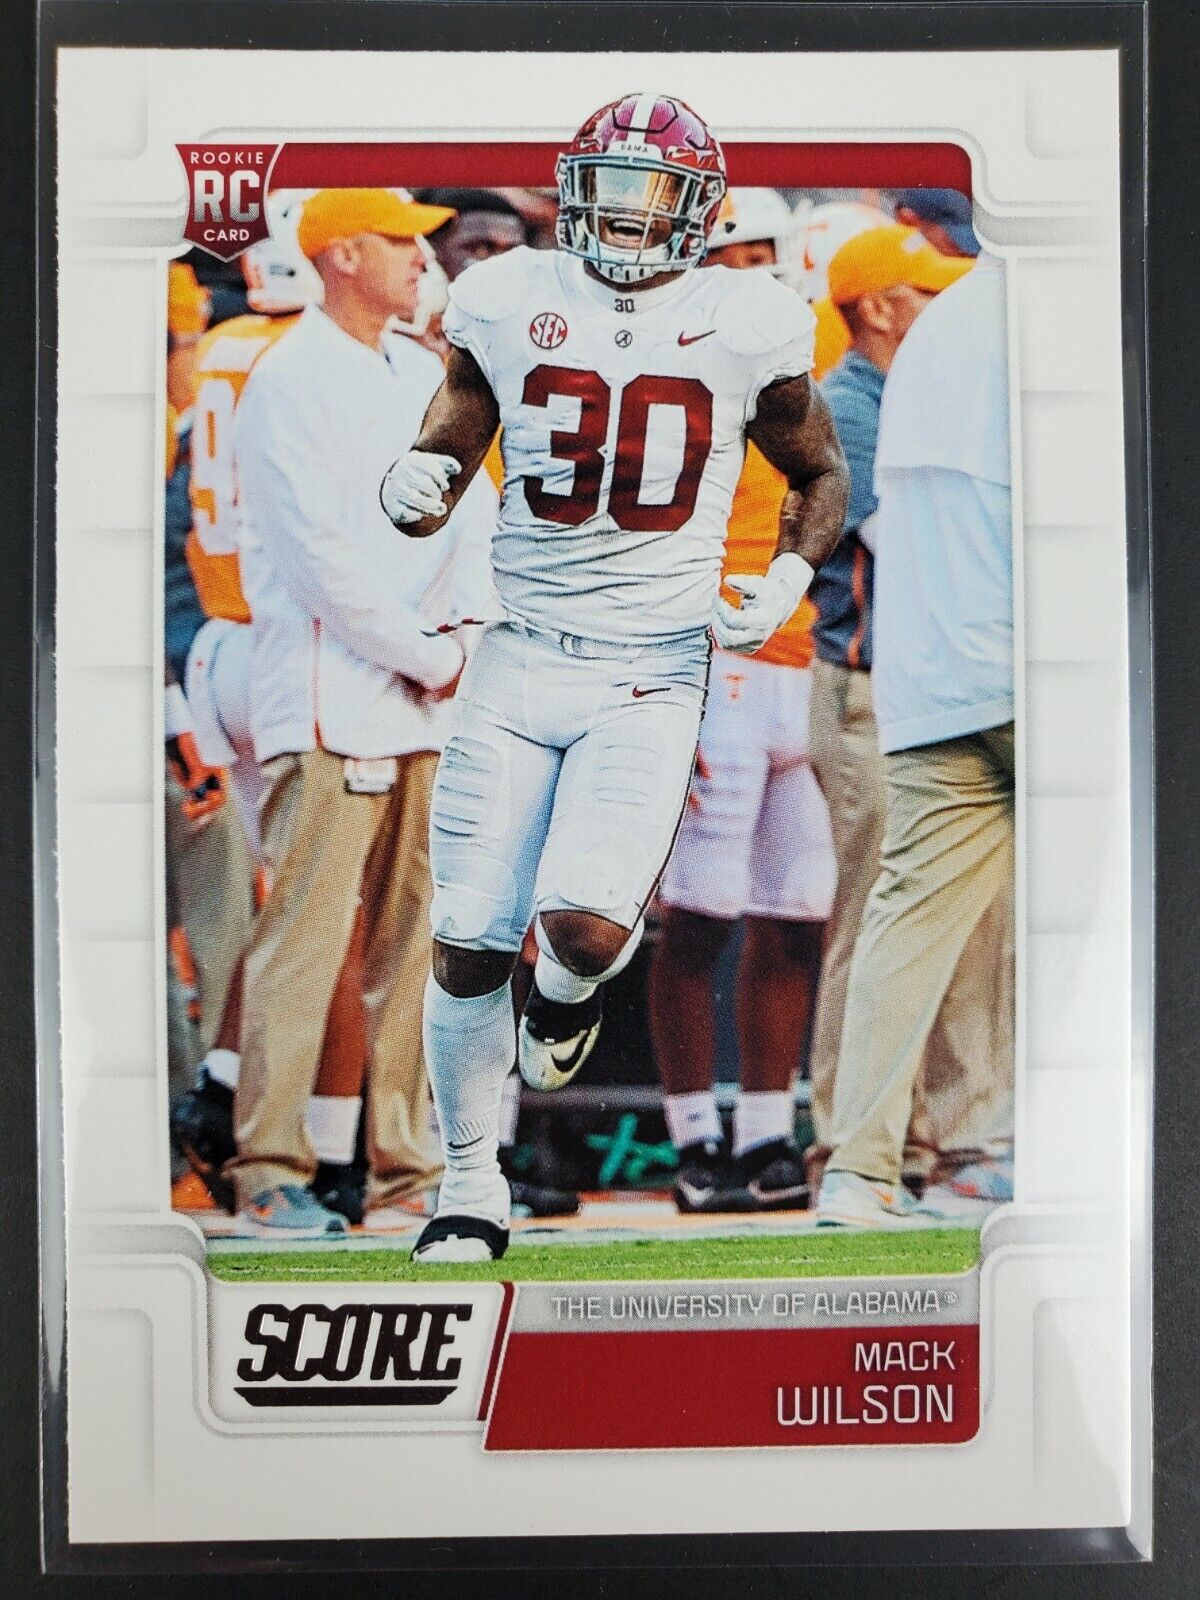 2019 Panini Score Mack Wilson RC Alabama Cleveland Browns Rookie Card #371. rookie card picture